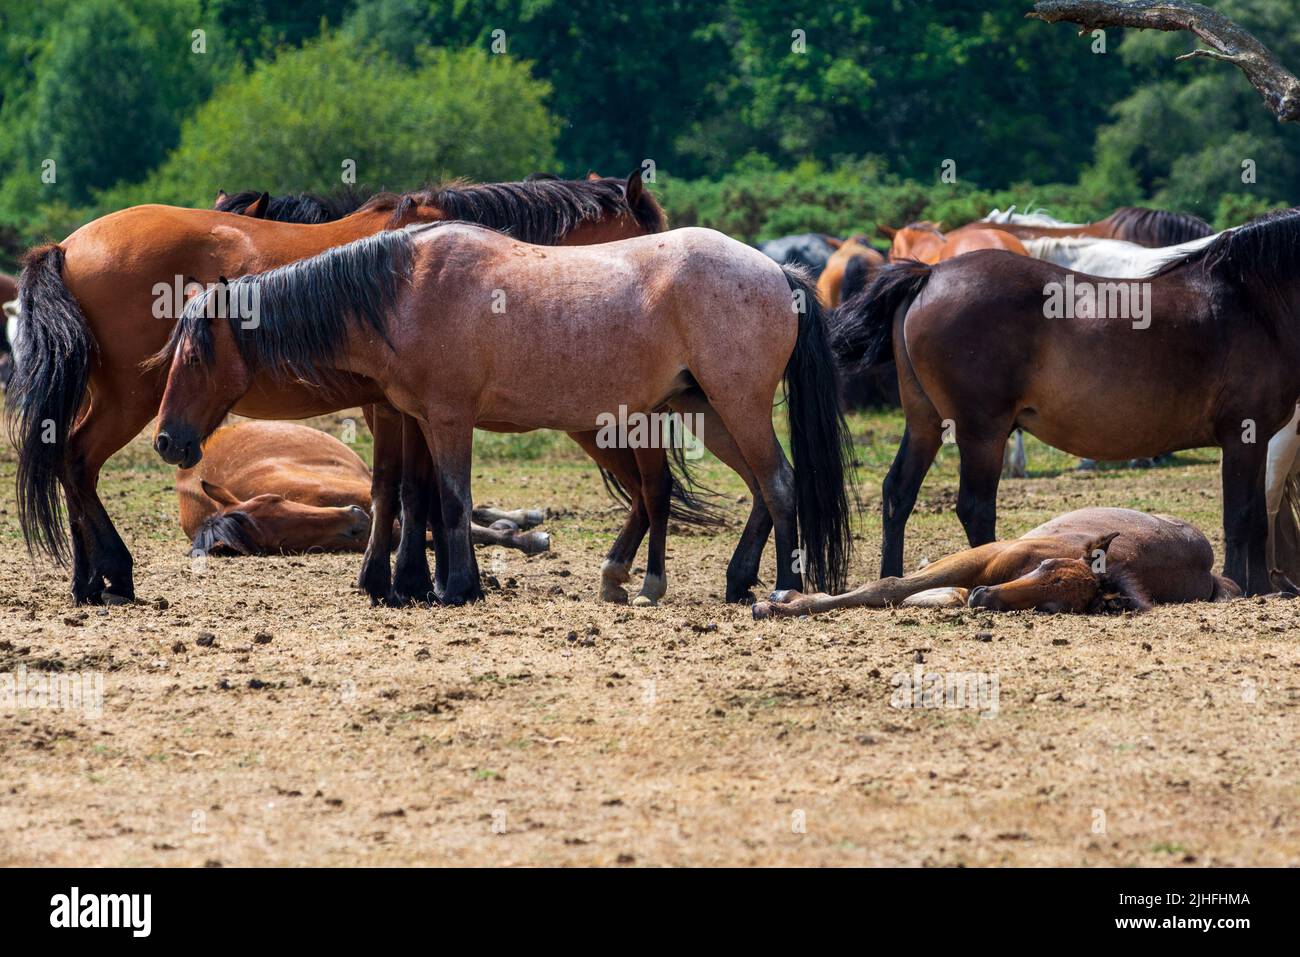 Godshill, Fordingbridge, New Forest, Hampshire, UK, 18th July 2022, Heatwaver: Temperature tops 30 degrees in the midday sun. New Forest ponies rest and conserve energy in a landscape parched by the extreme hot and dry weather. Paul Biggins/Alamy Live News Stock Photo